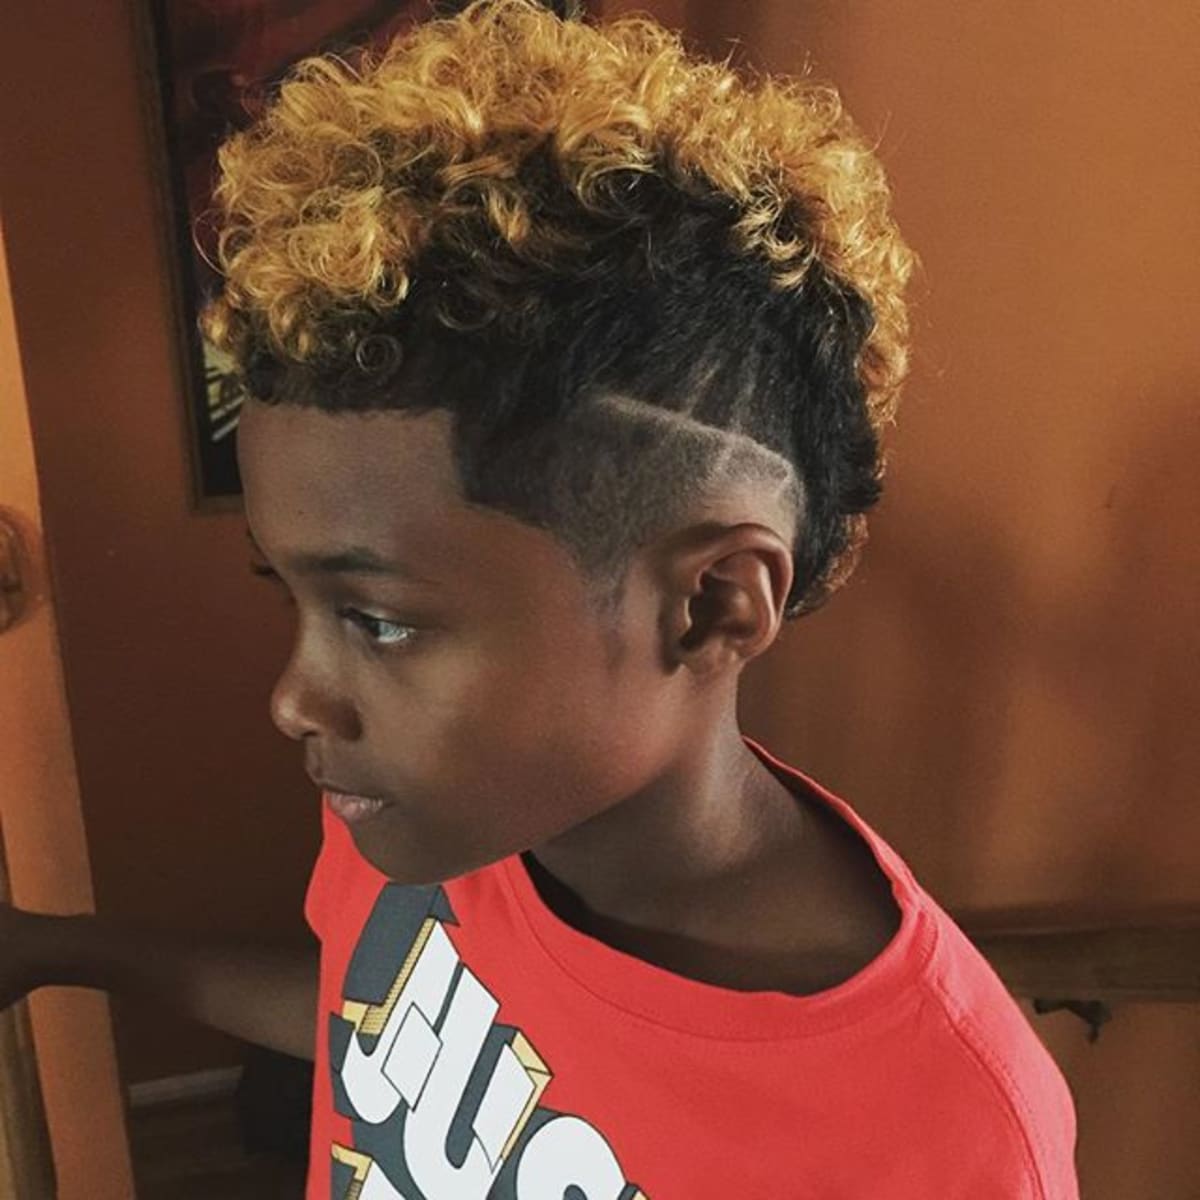 Darnell Docketts Son Got His Hair Cut To Look Like Odell Beckham